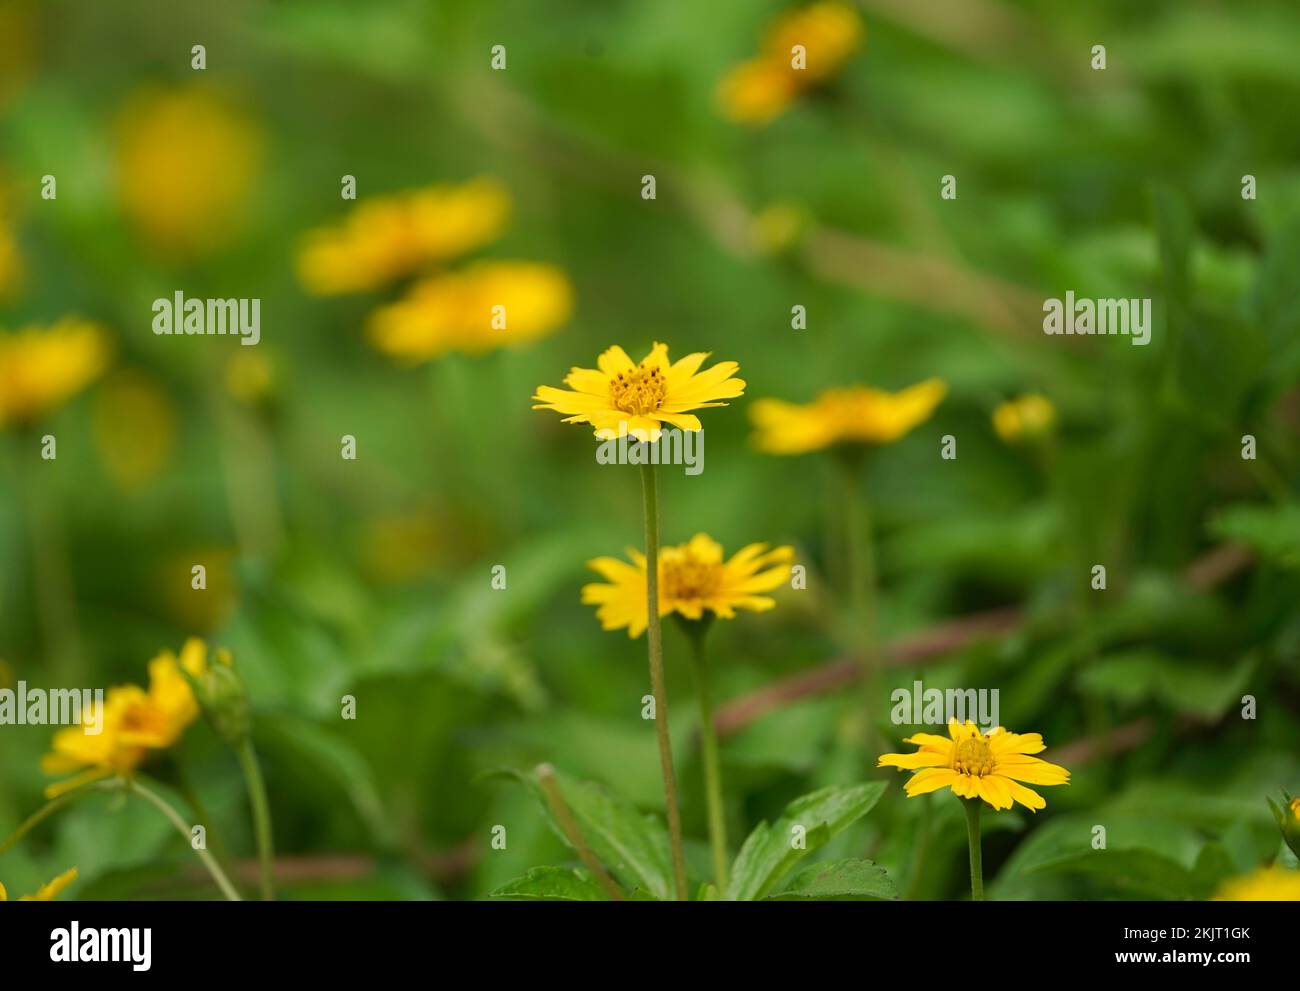 Sphagneticola Trilobata Blooming Outdoors, Daisy-like flowers, sselective focus, group of yellow daisy flower, Closeup yellow trailing daisy flower in Stock Photo